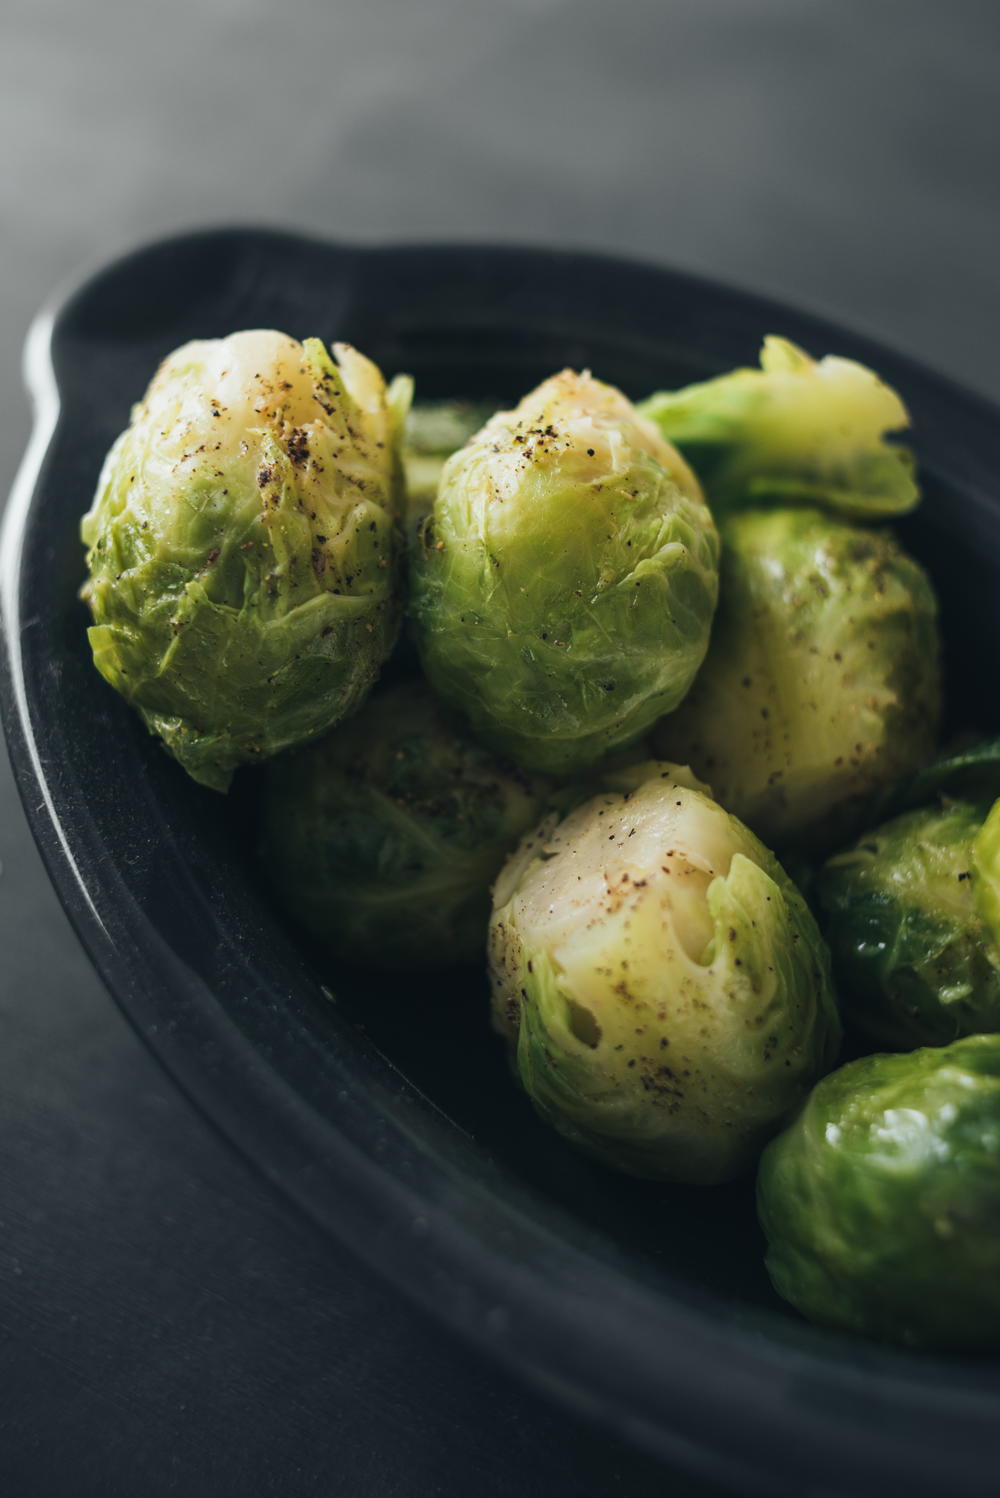 How to Boil Brussels Sprouts | Cookstr.com